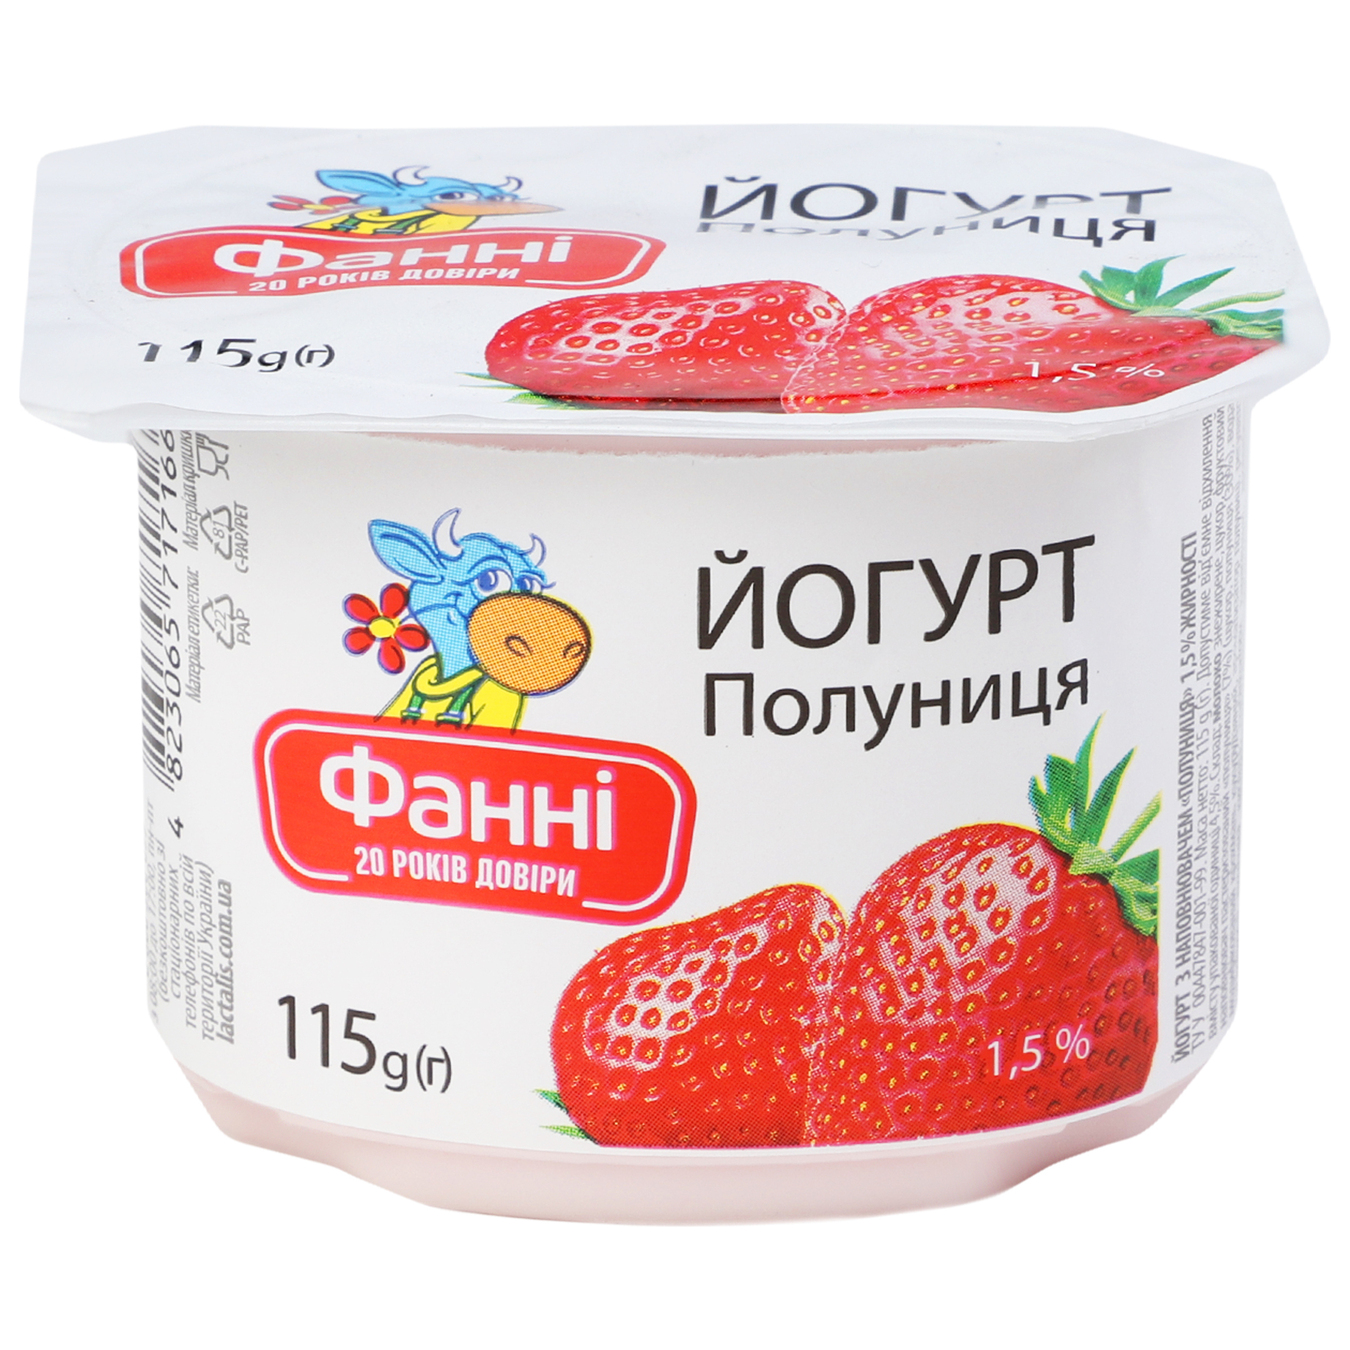 Fanny yogurt with strawberry filling cup 1.5% 115g 6